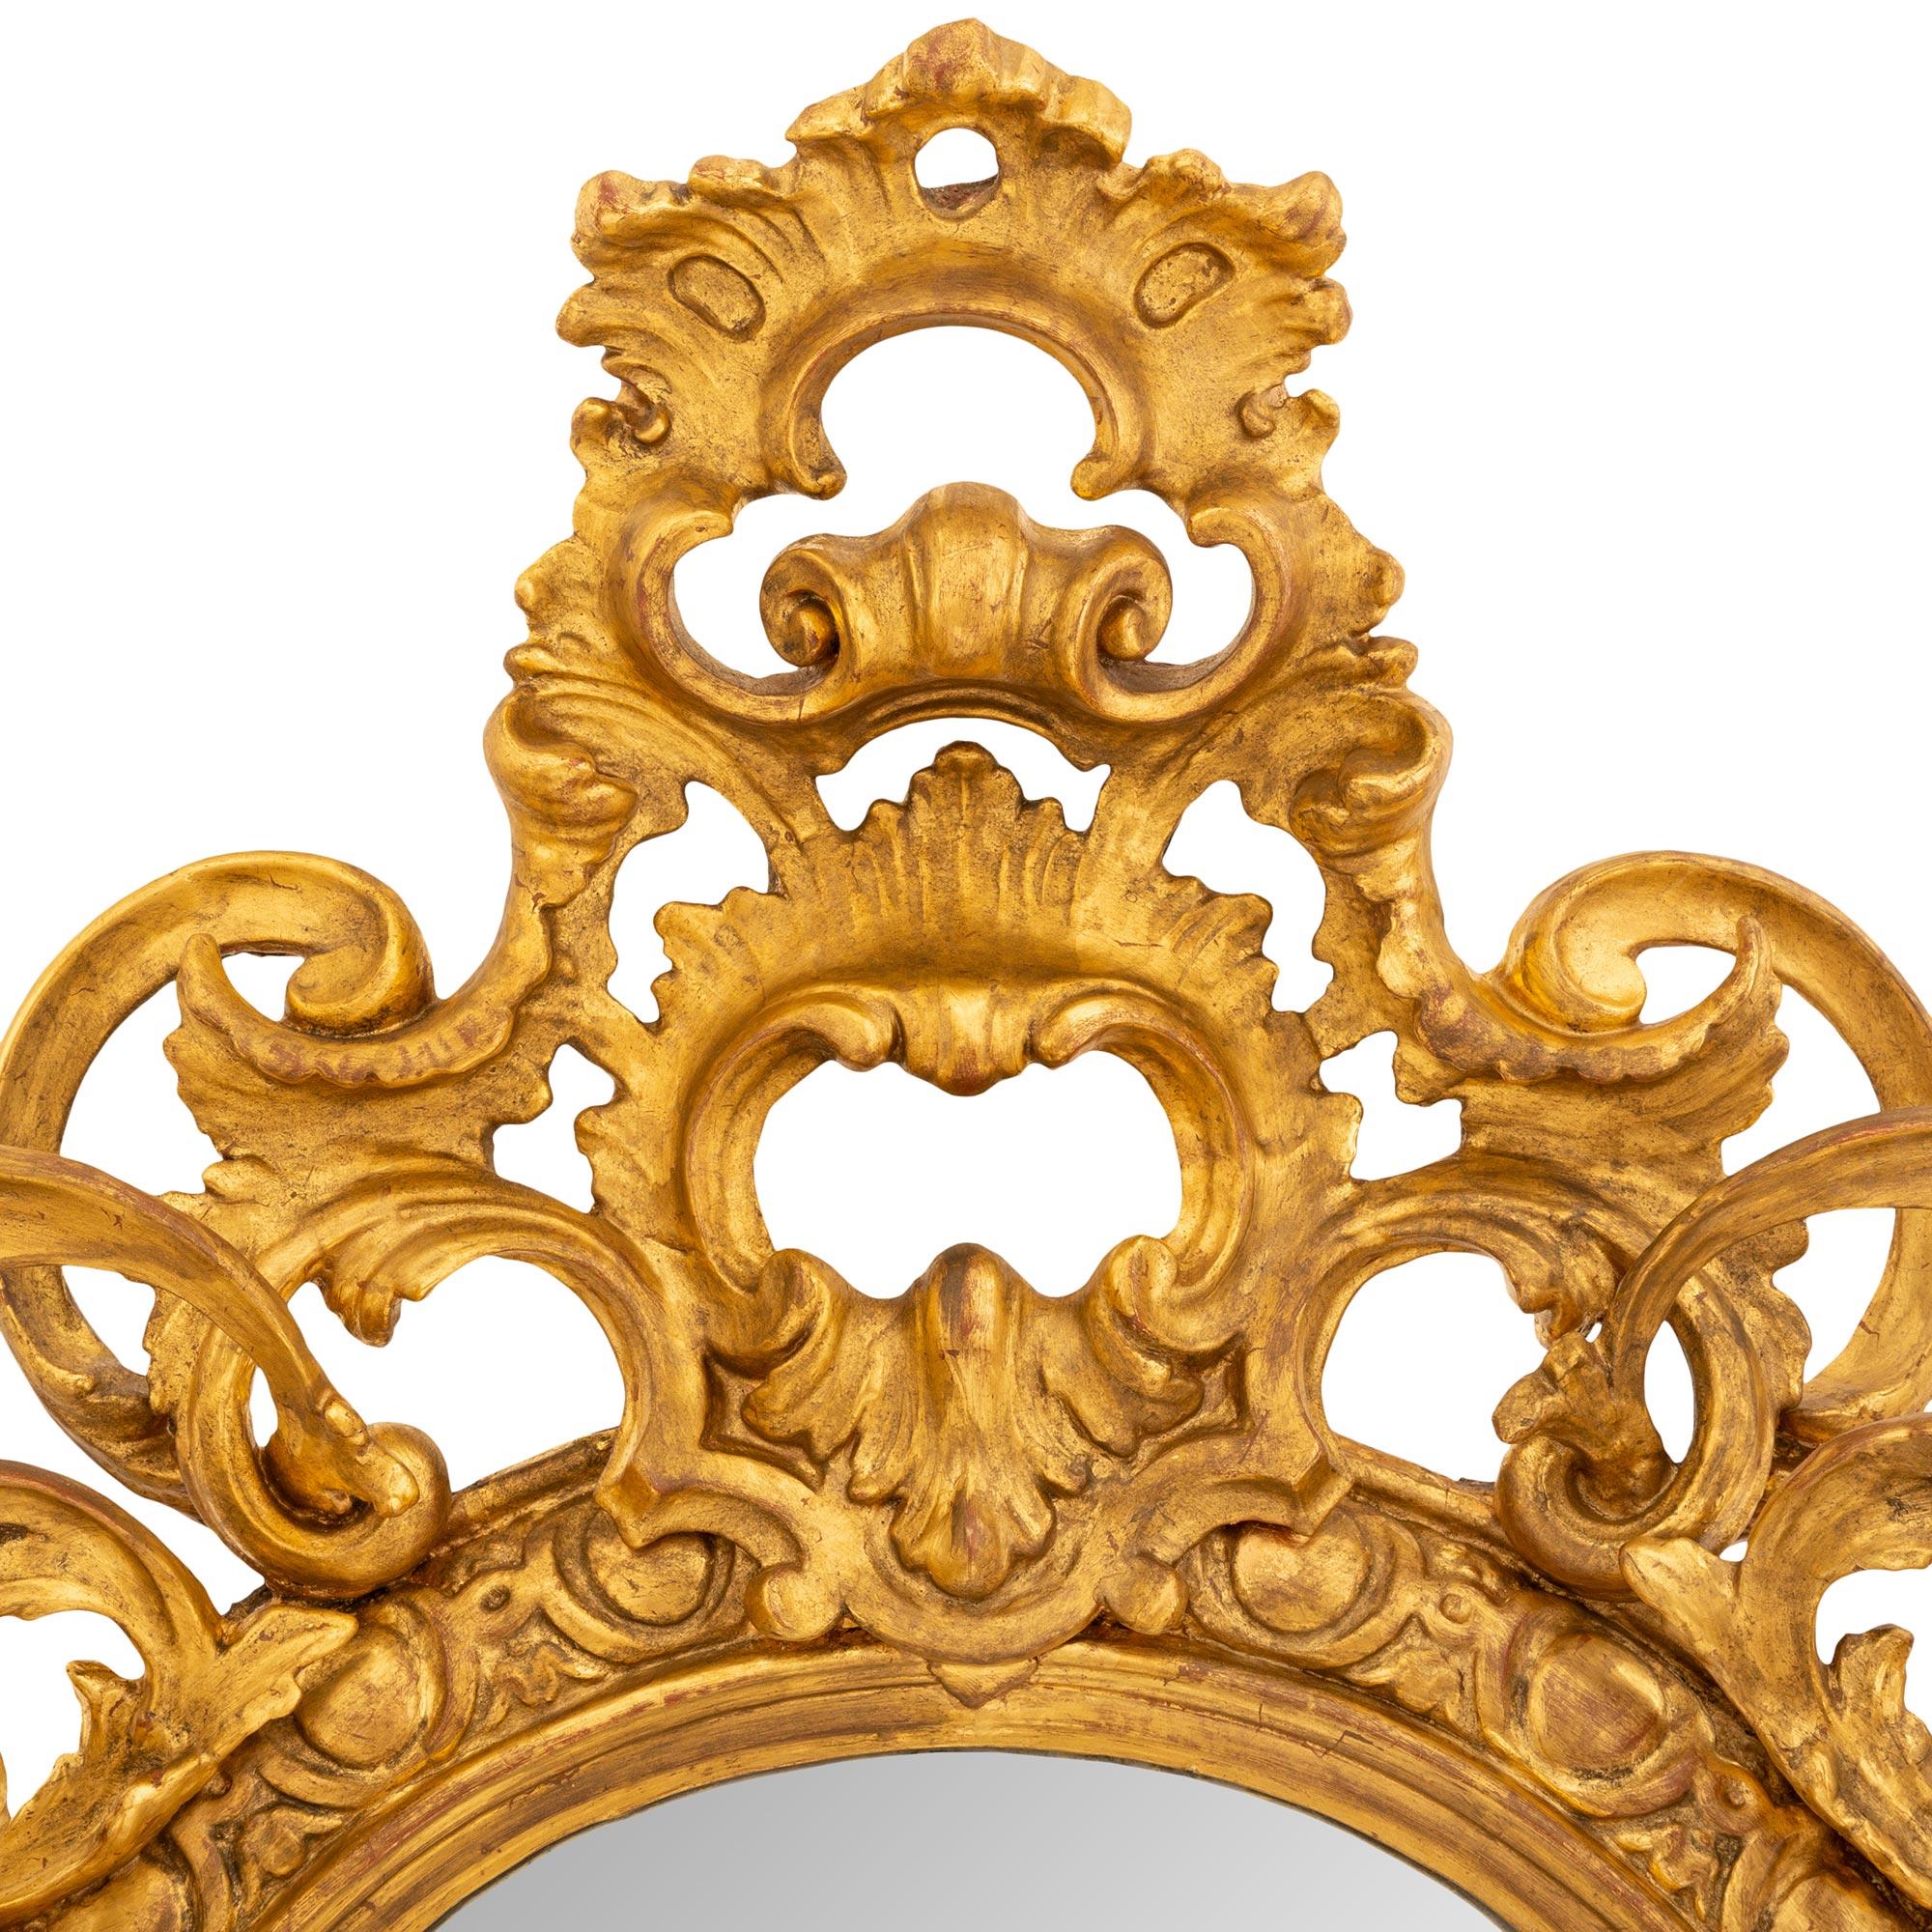  Italian 18th Century Giltwood Mirror In Good Condition For Sale In West Palm Beach, FL